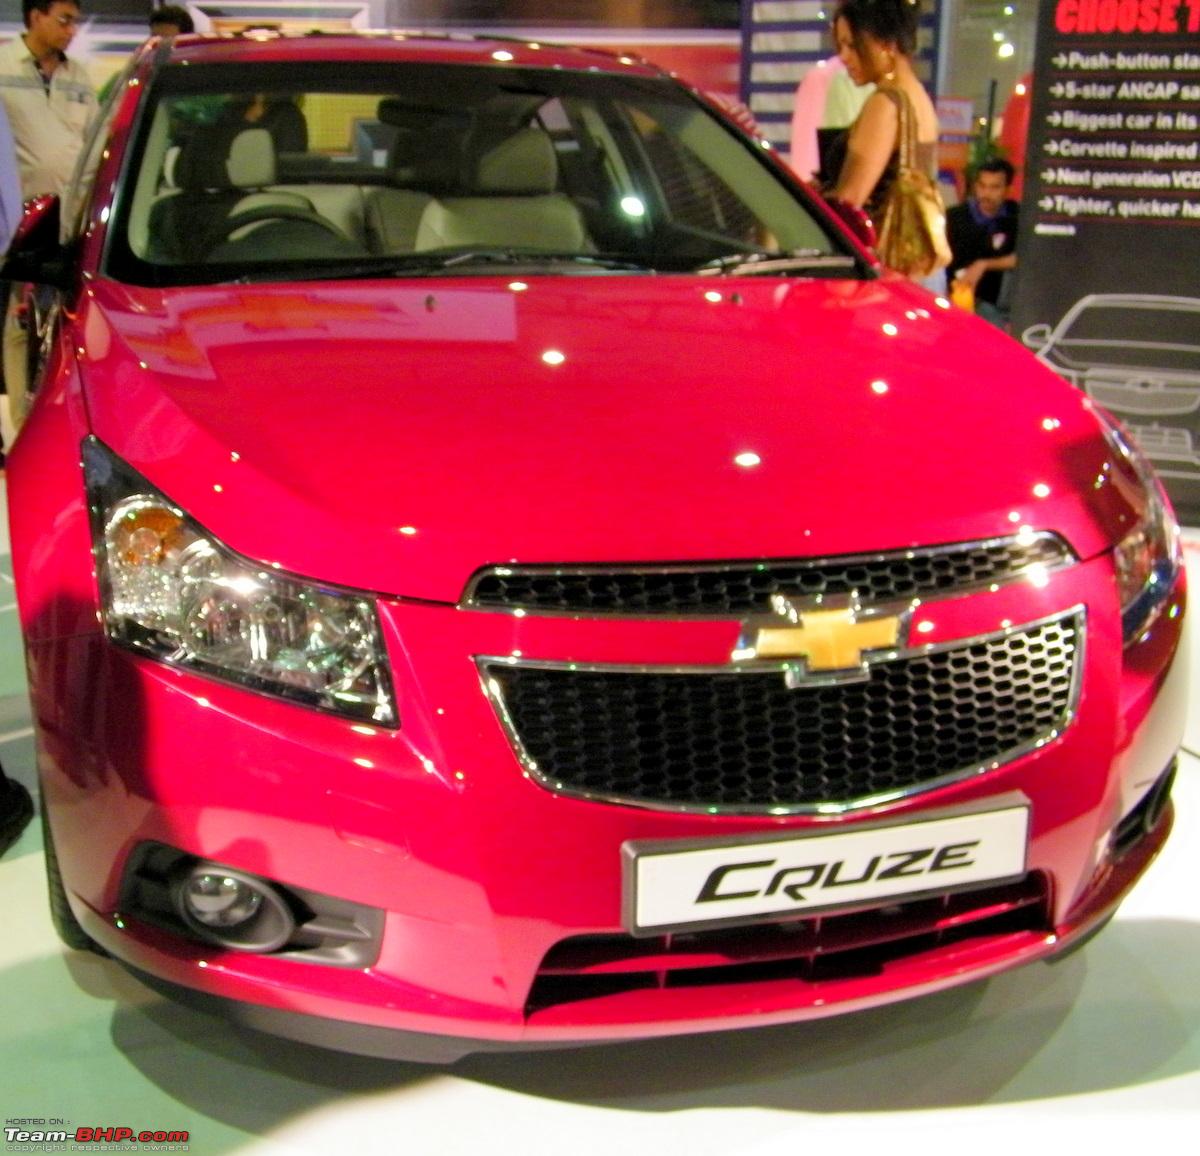 My Chevy Cruze 2.0 VCDi diesel at 10,000 kmlikes and dislikes